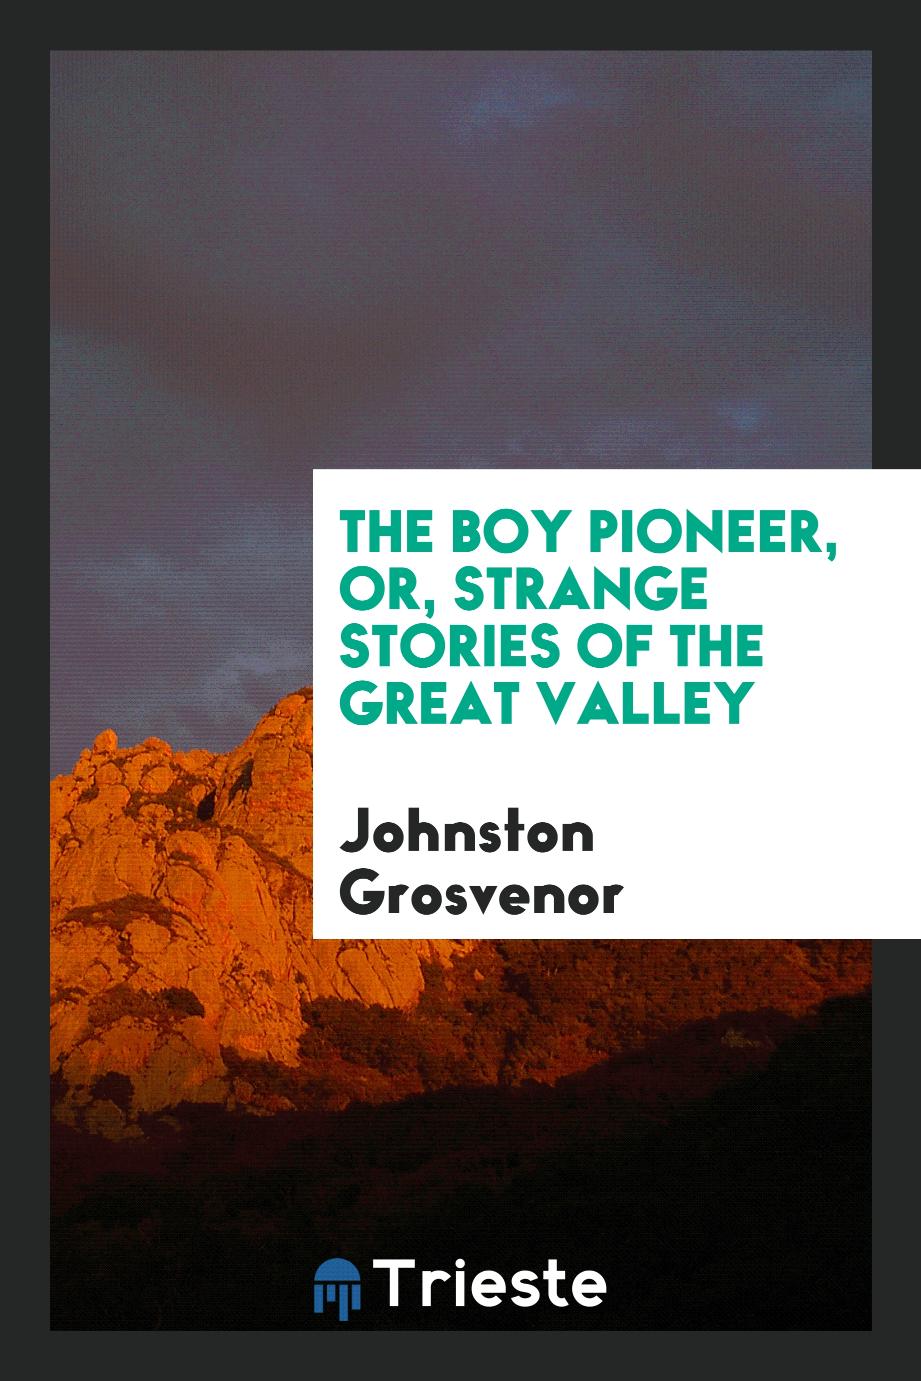 The Boy Pioneer, or, Strange Stories of the Great Valley